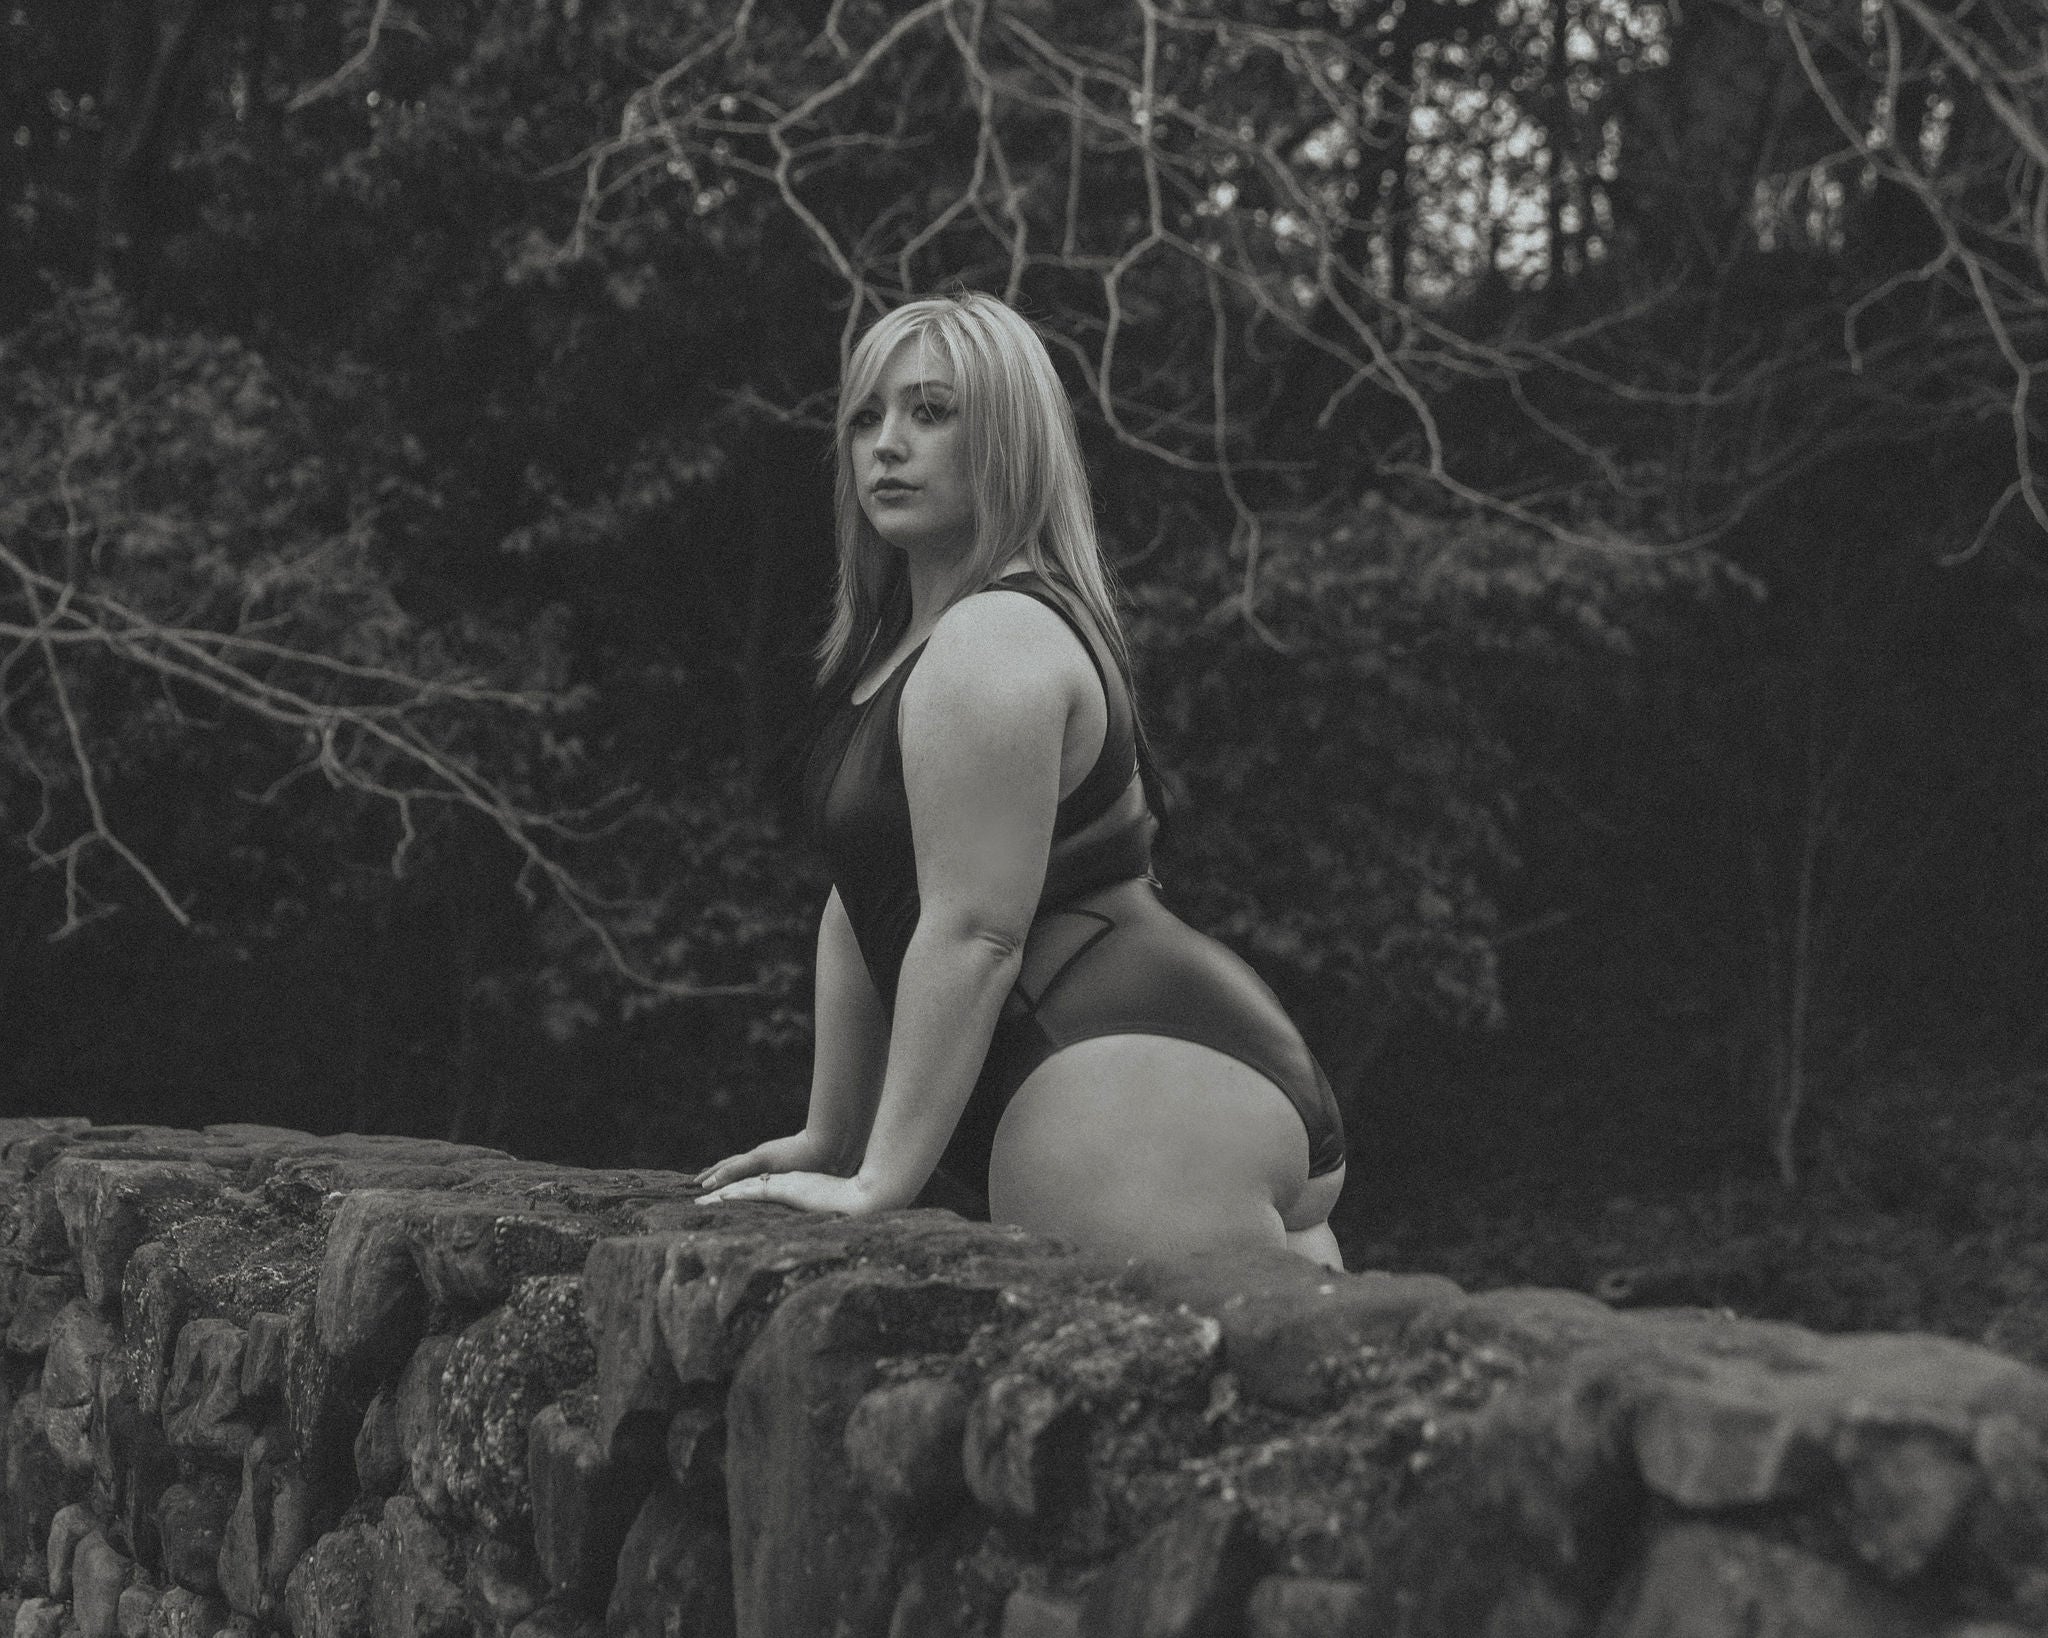 Black and white image of woman standing outdoors by a rock wall wearing a leather bodysuit.